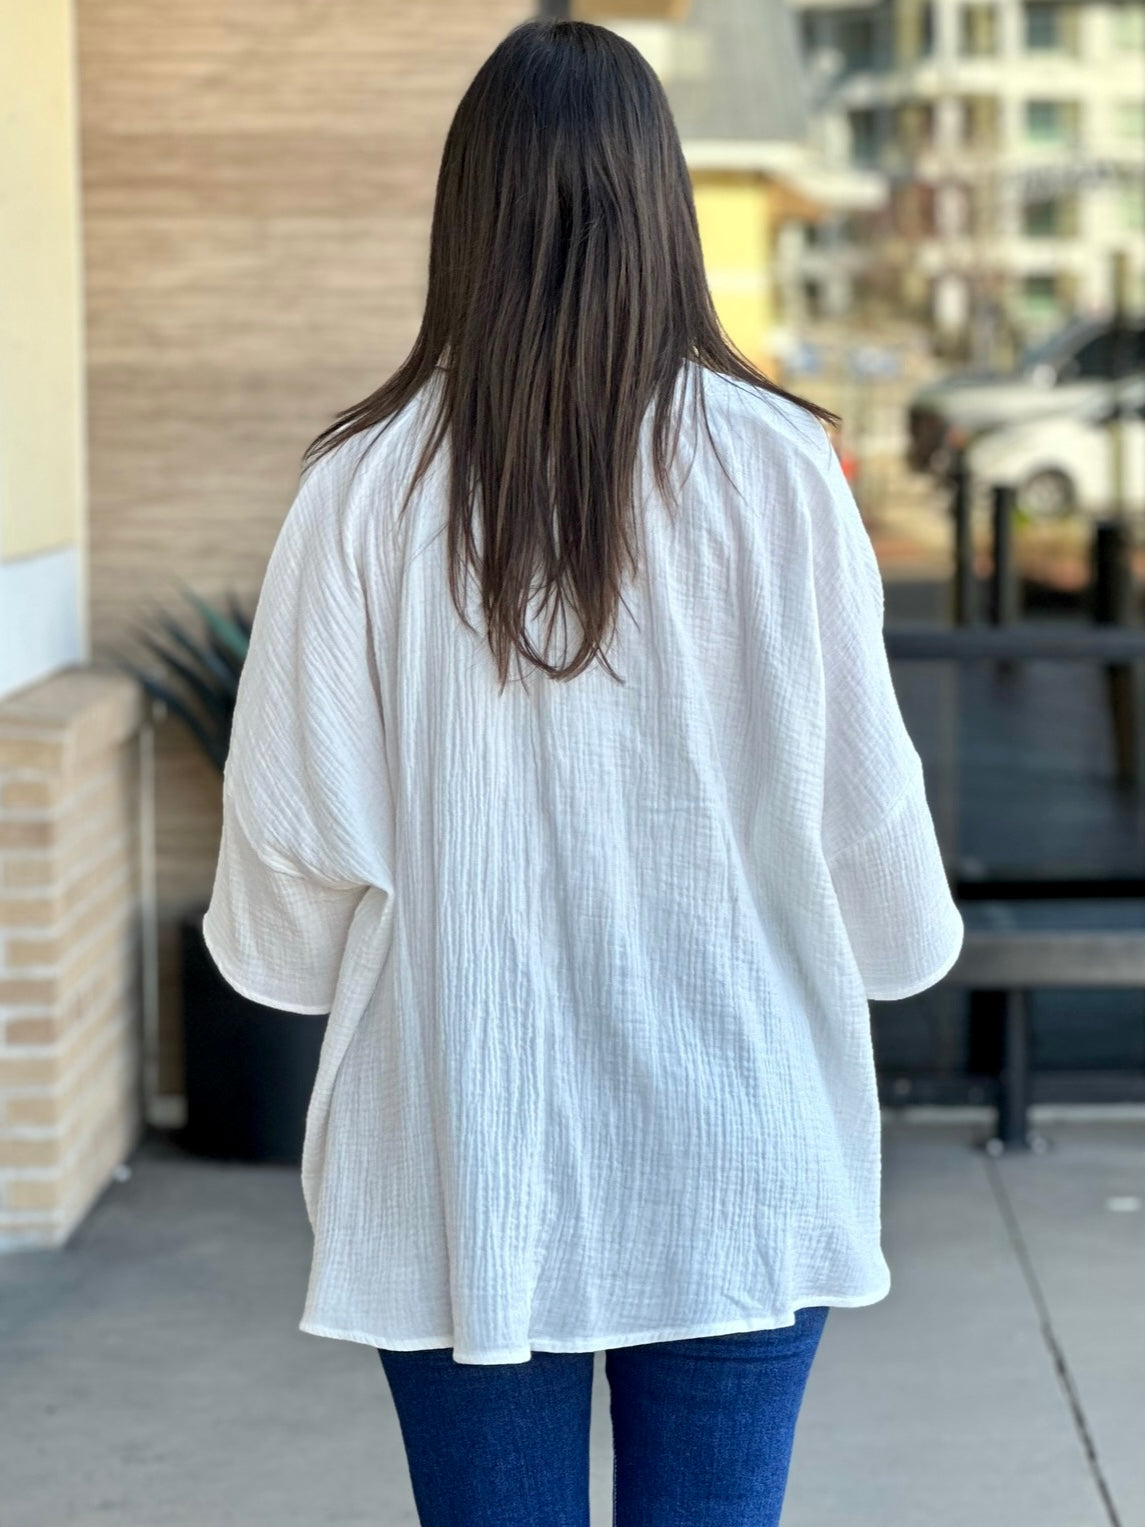 Megan in off white top back view